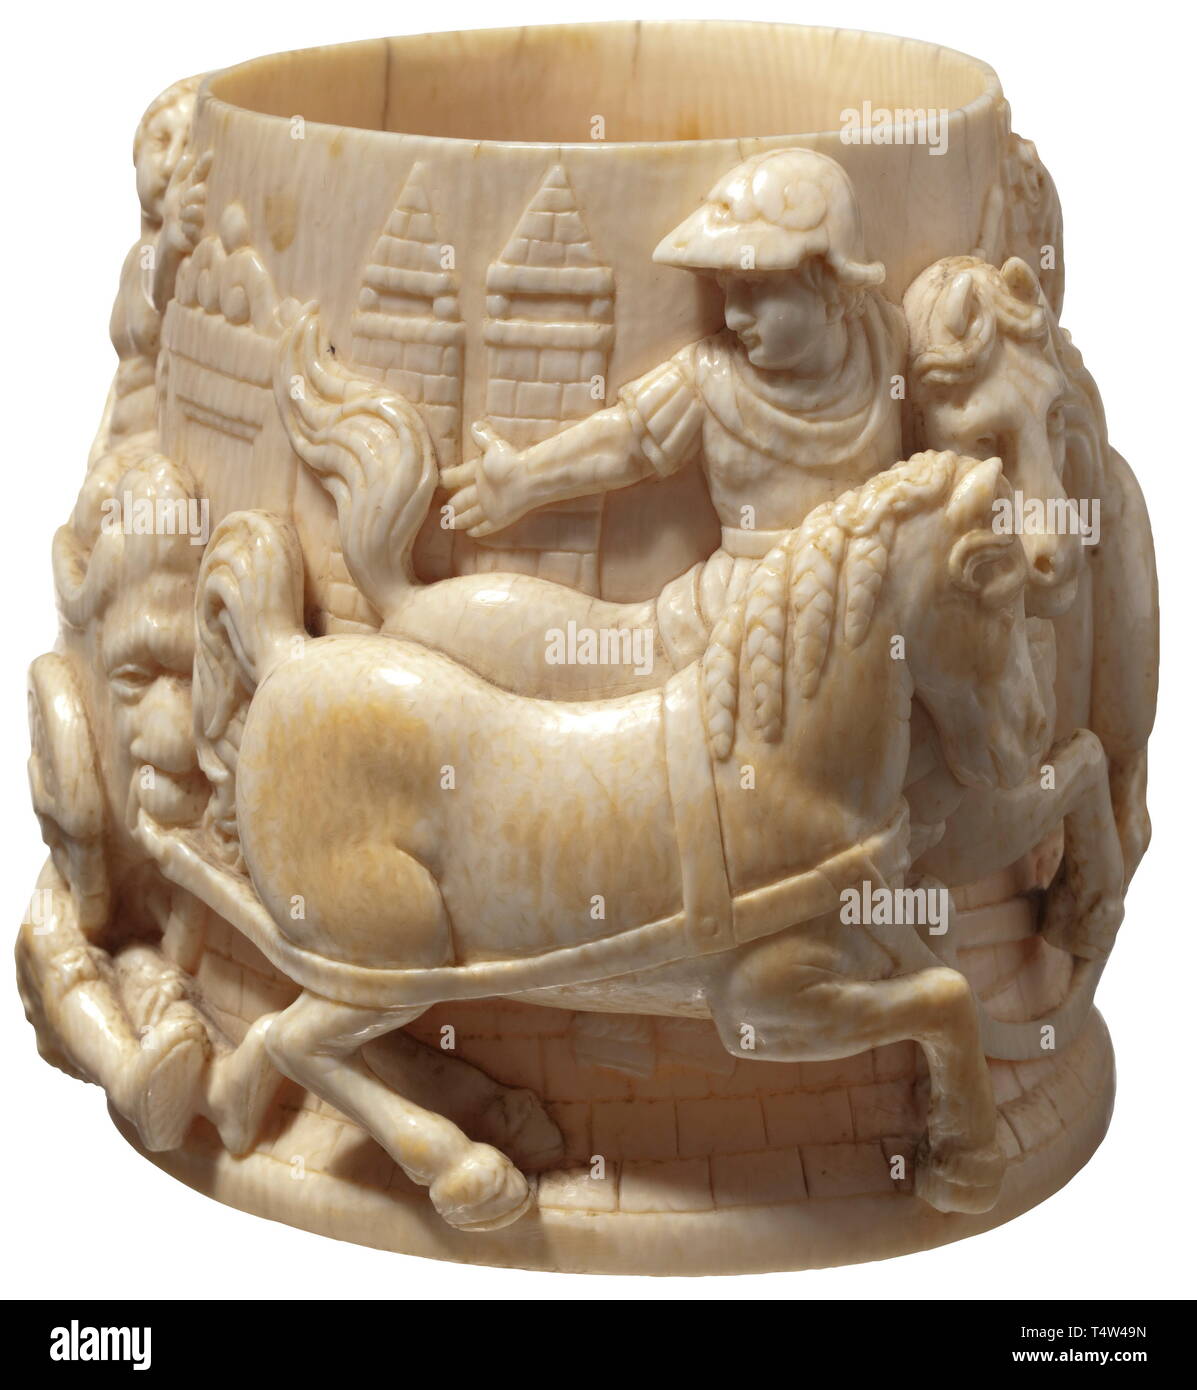 A body of a German ivory beaker, 17th century. Finely carved ivory, the exterior decorated with a continuous mythological scene in high relief. Hermes in his role as psychopomp leads Persephone, the goddess of spring, back to earth, under the wheels of her chariot her husband Hades, who abducted her to the underworld. Height 10.8 cm. Superbly crafted carving. historic, historical, handicrafts, handcraft, craft, object, objects, stills, clipping, clippings, cut out, cut-out, cut-outs, 17th century, Additional-Rights-Clearance-Info-Not-Available Stock Photo